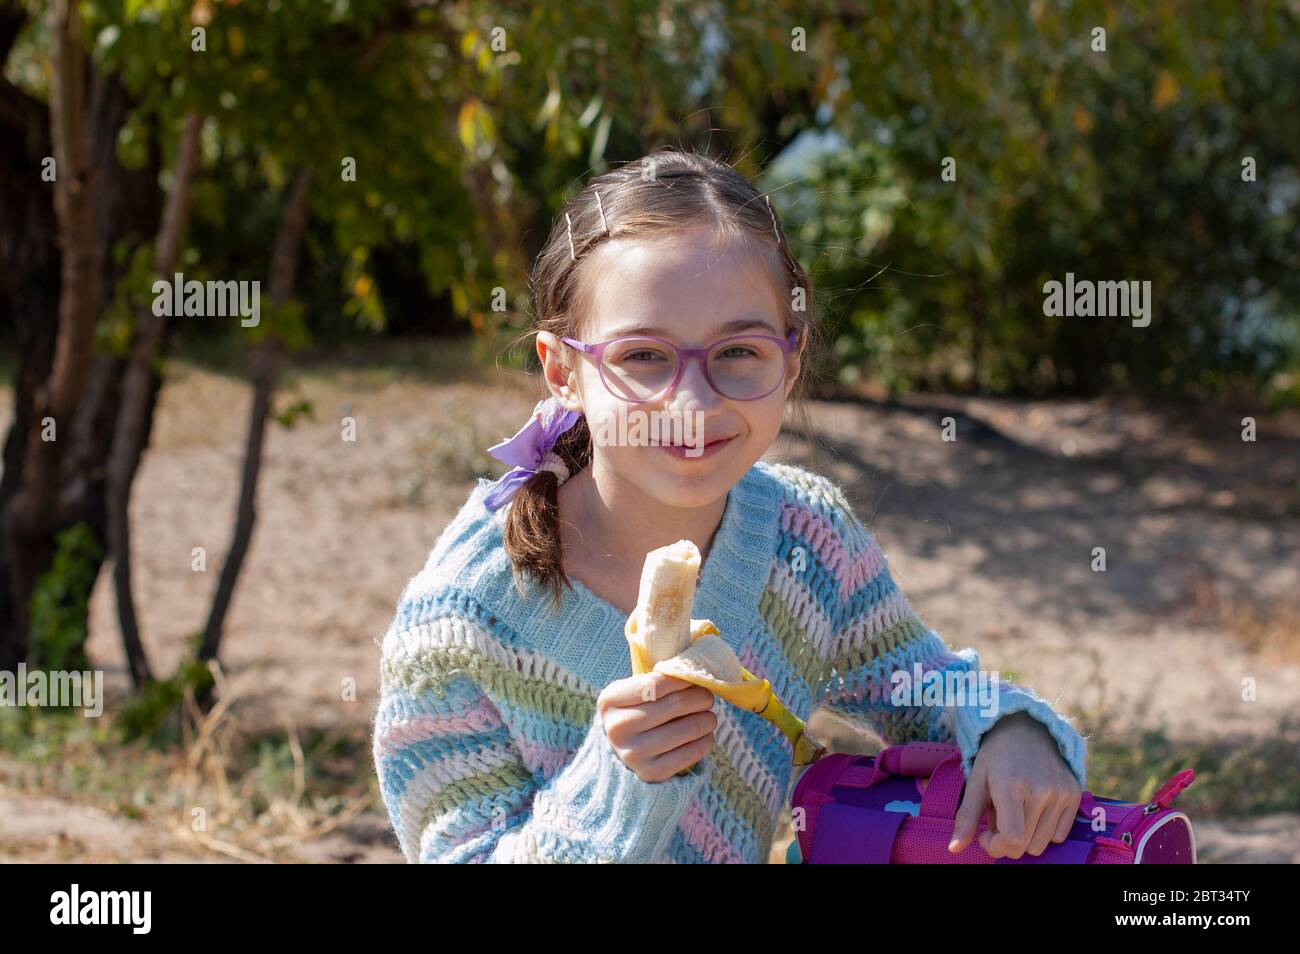 Schoolgirl eating a banana in the street. Alpha generation children will be the driving force behind progress in our century. They are more balanced, Stock Photo